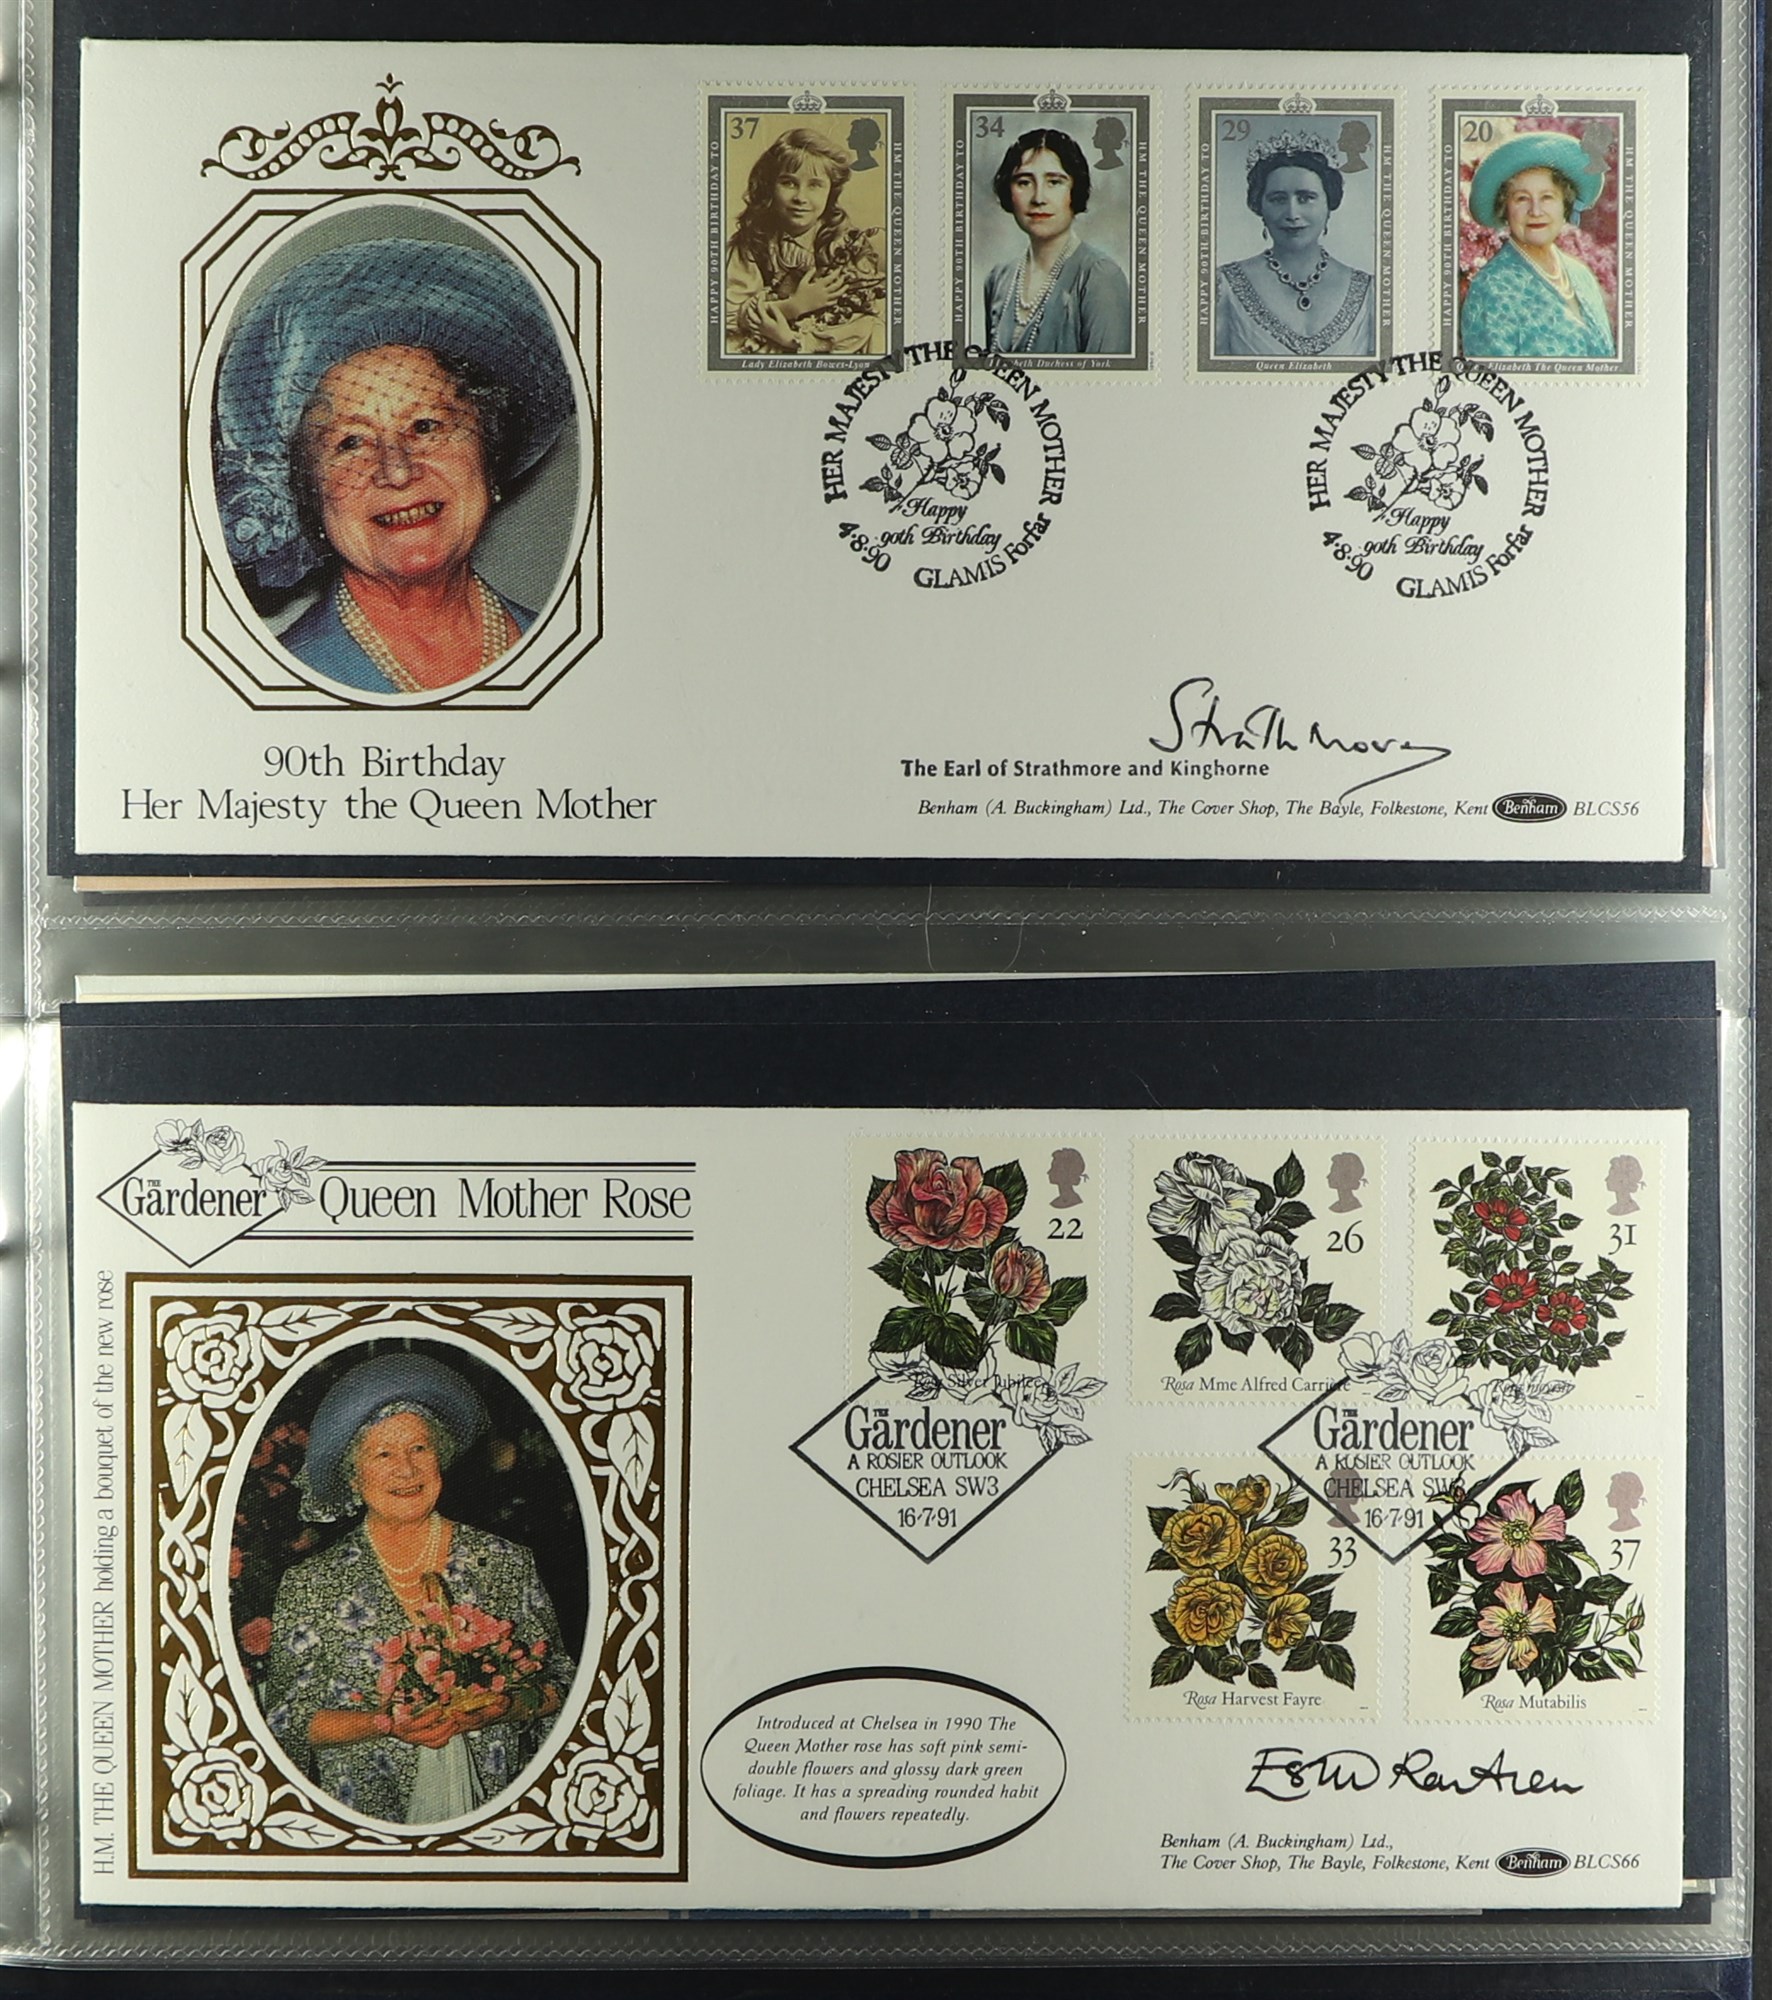 GREAT BRITAIN QUEEN MOTHER BENHAM COVERS COLLECTION 1990 to 2002 First Days Covers (39) with 24